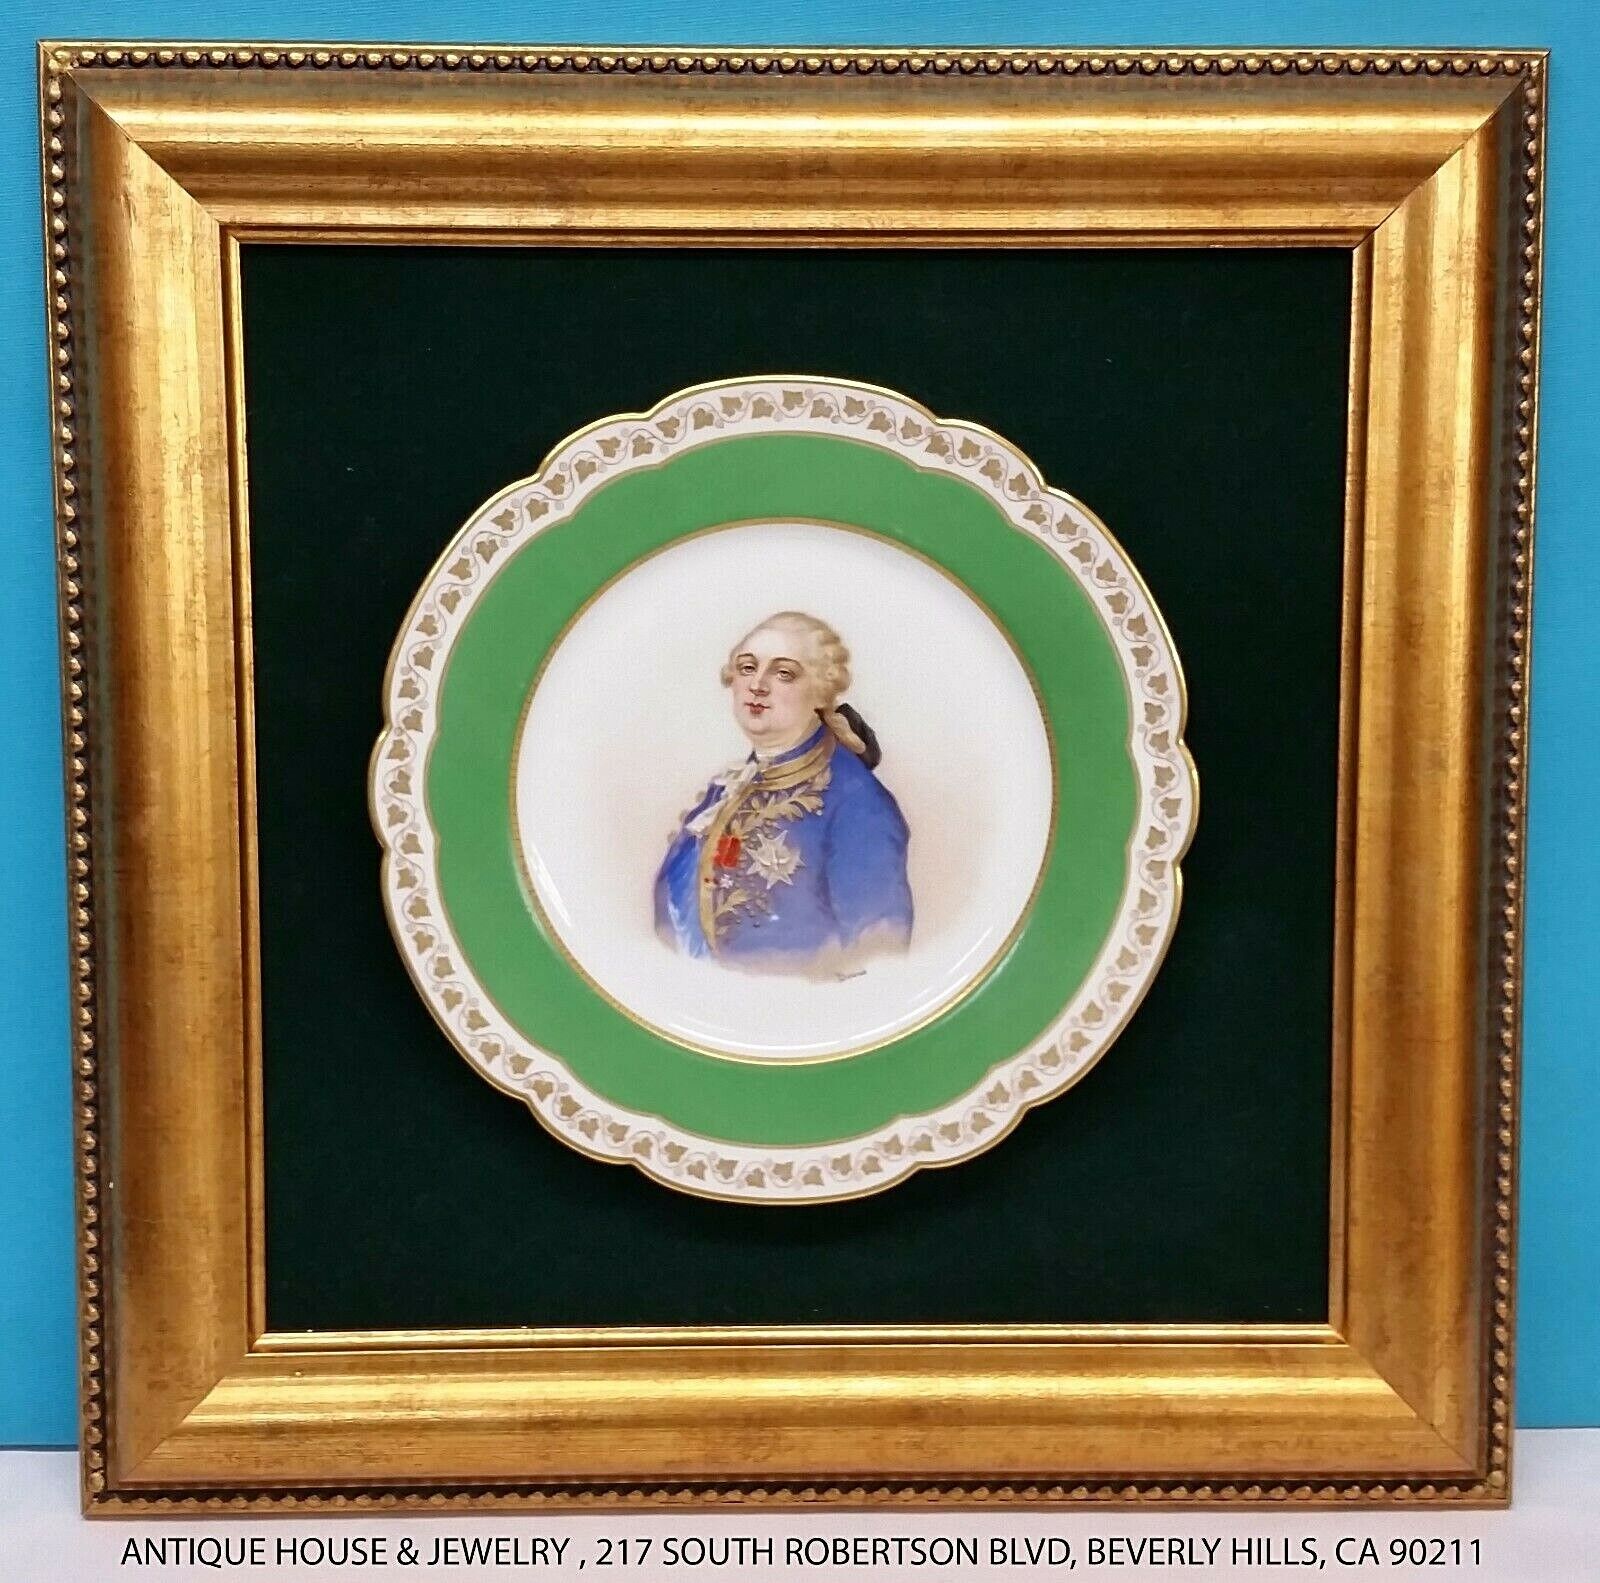 19th Century, 1846 French Porcelain Plate Depicting Louis XVI with Frame signed